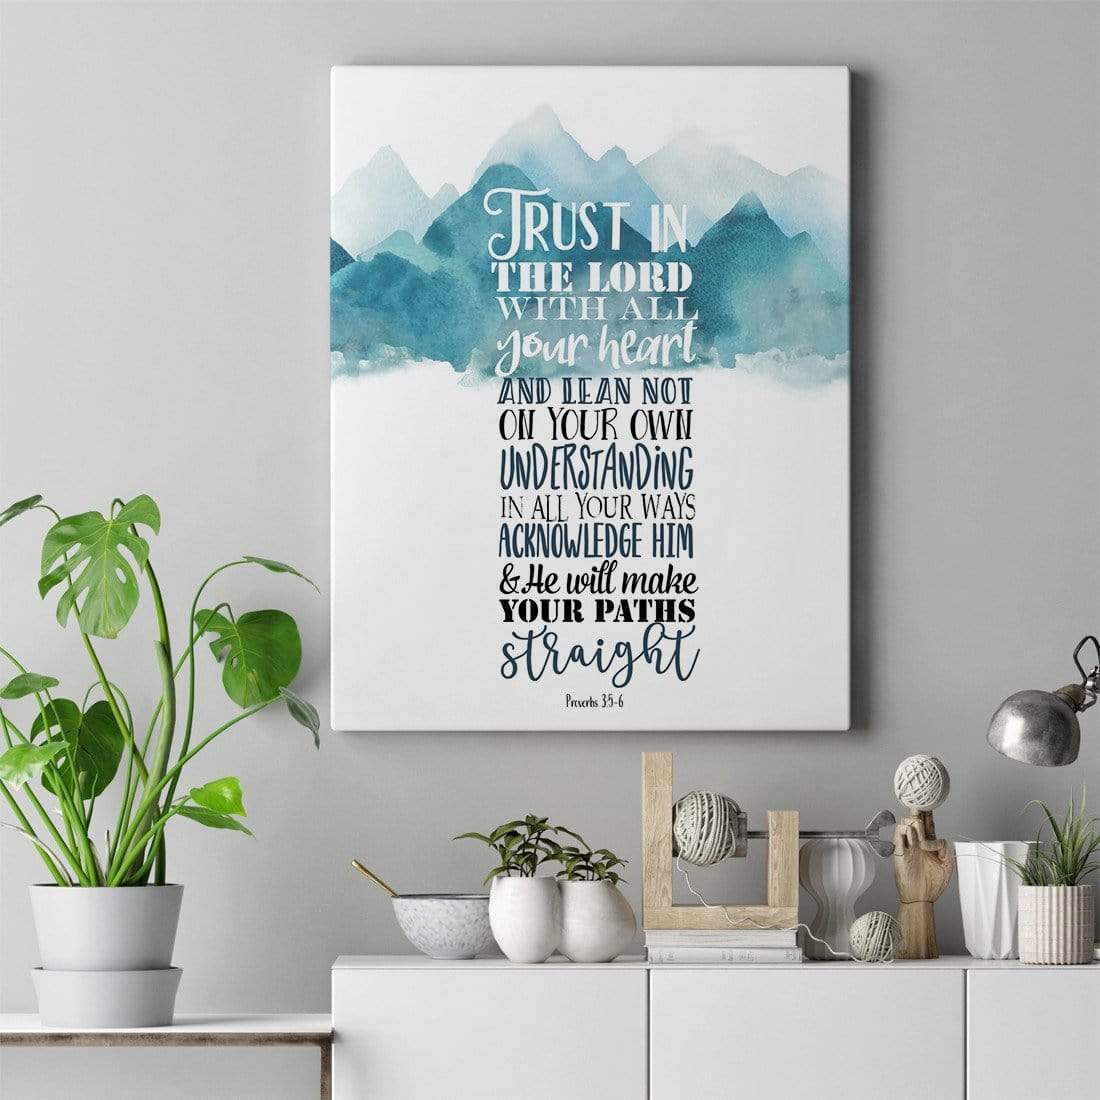 Living Words Wall Decor Trust in the Lord